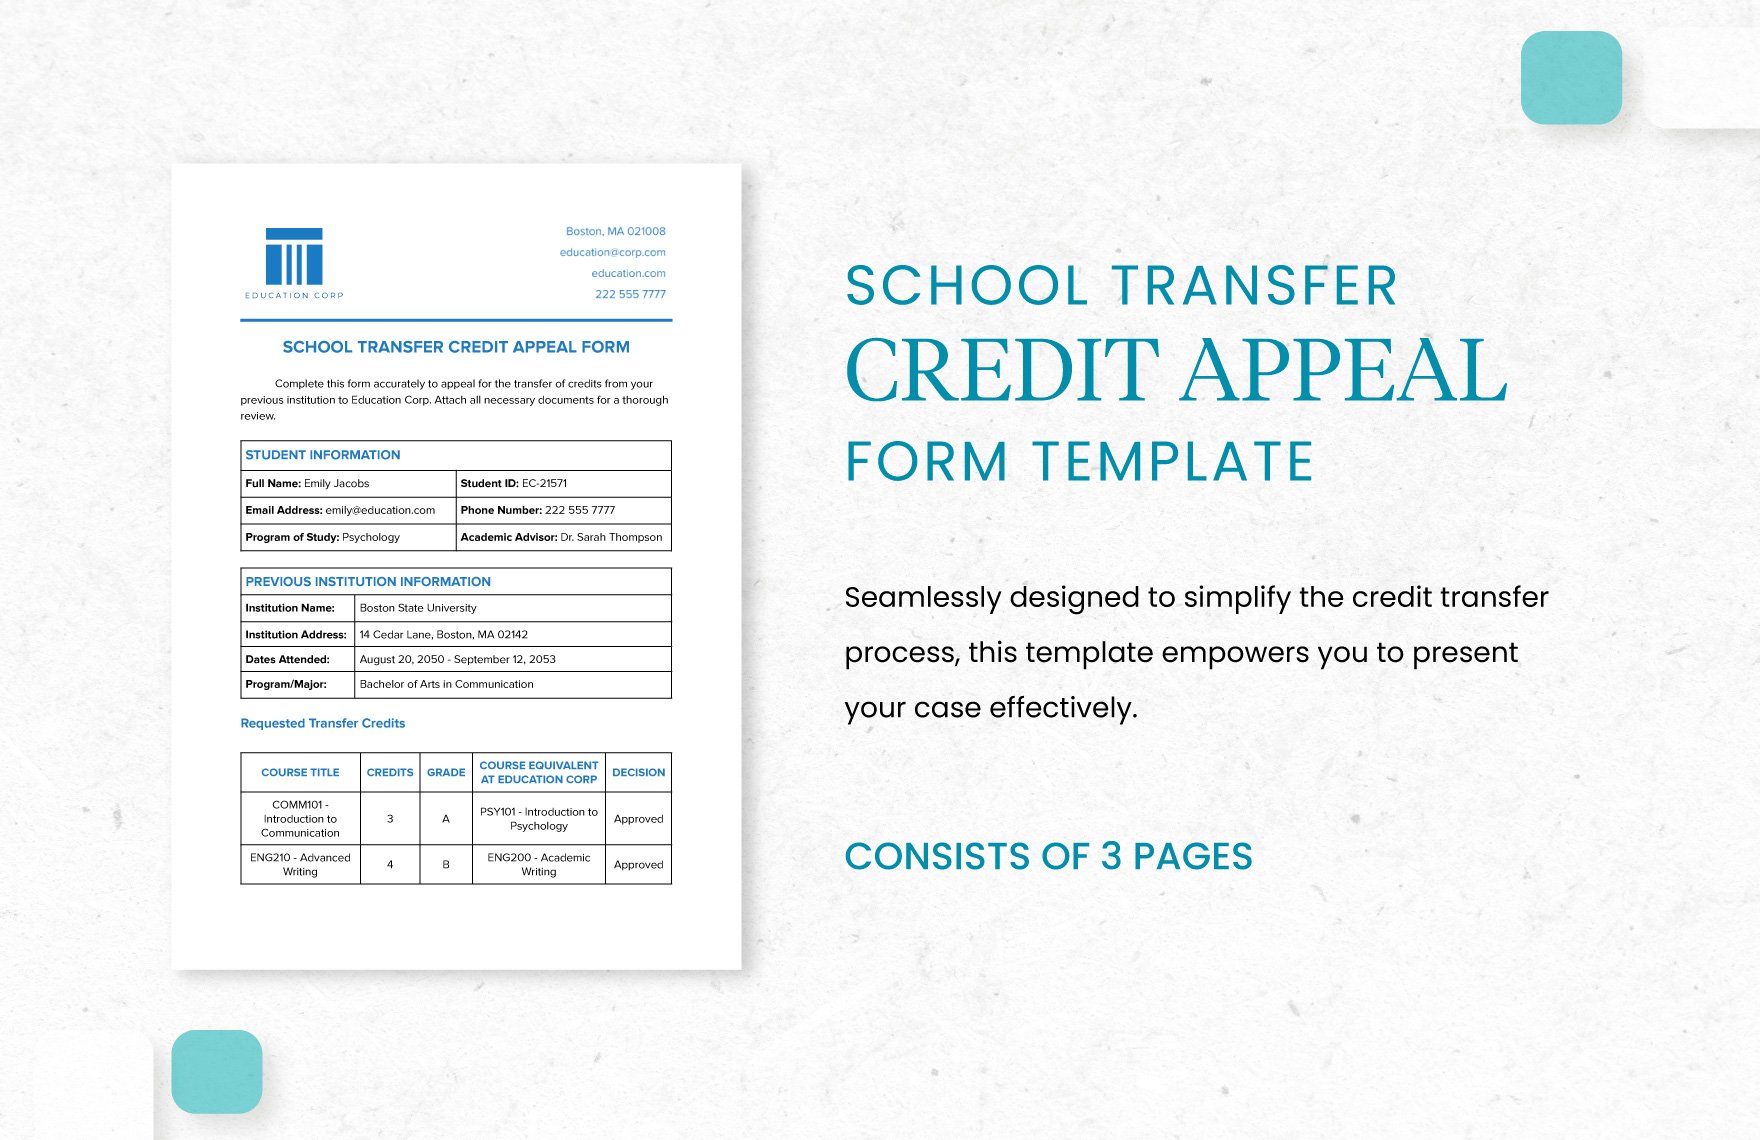 School Transfer Credit Appeal Form Template